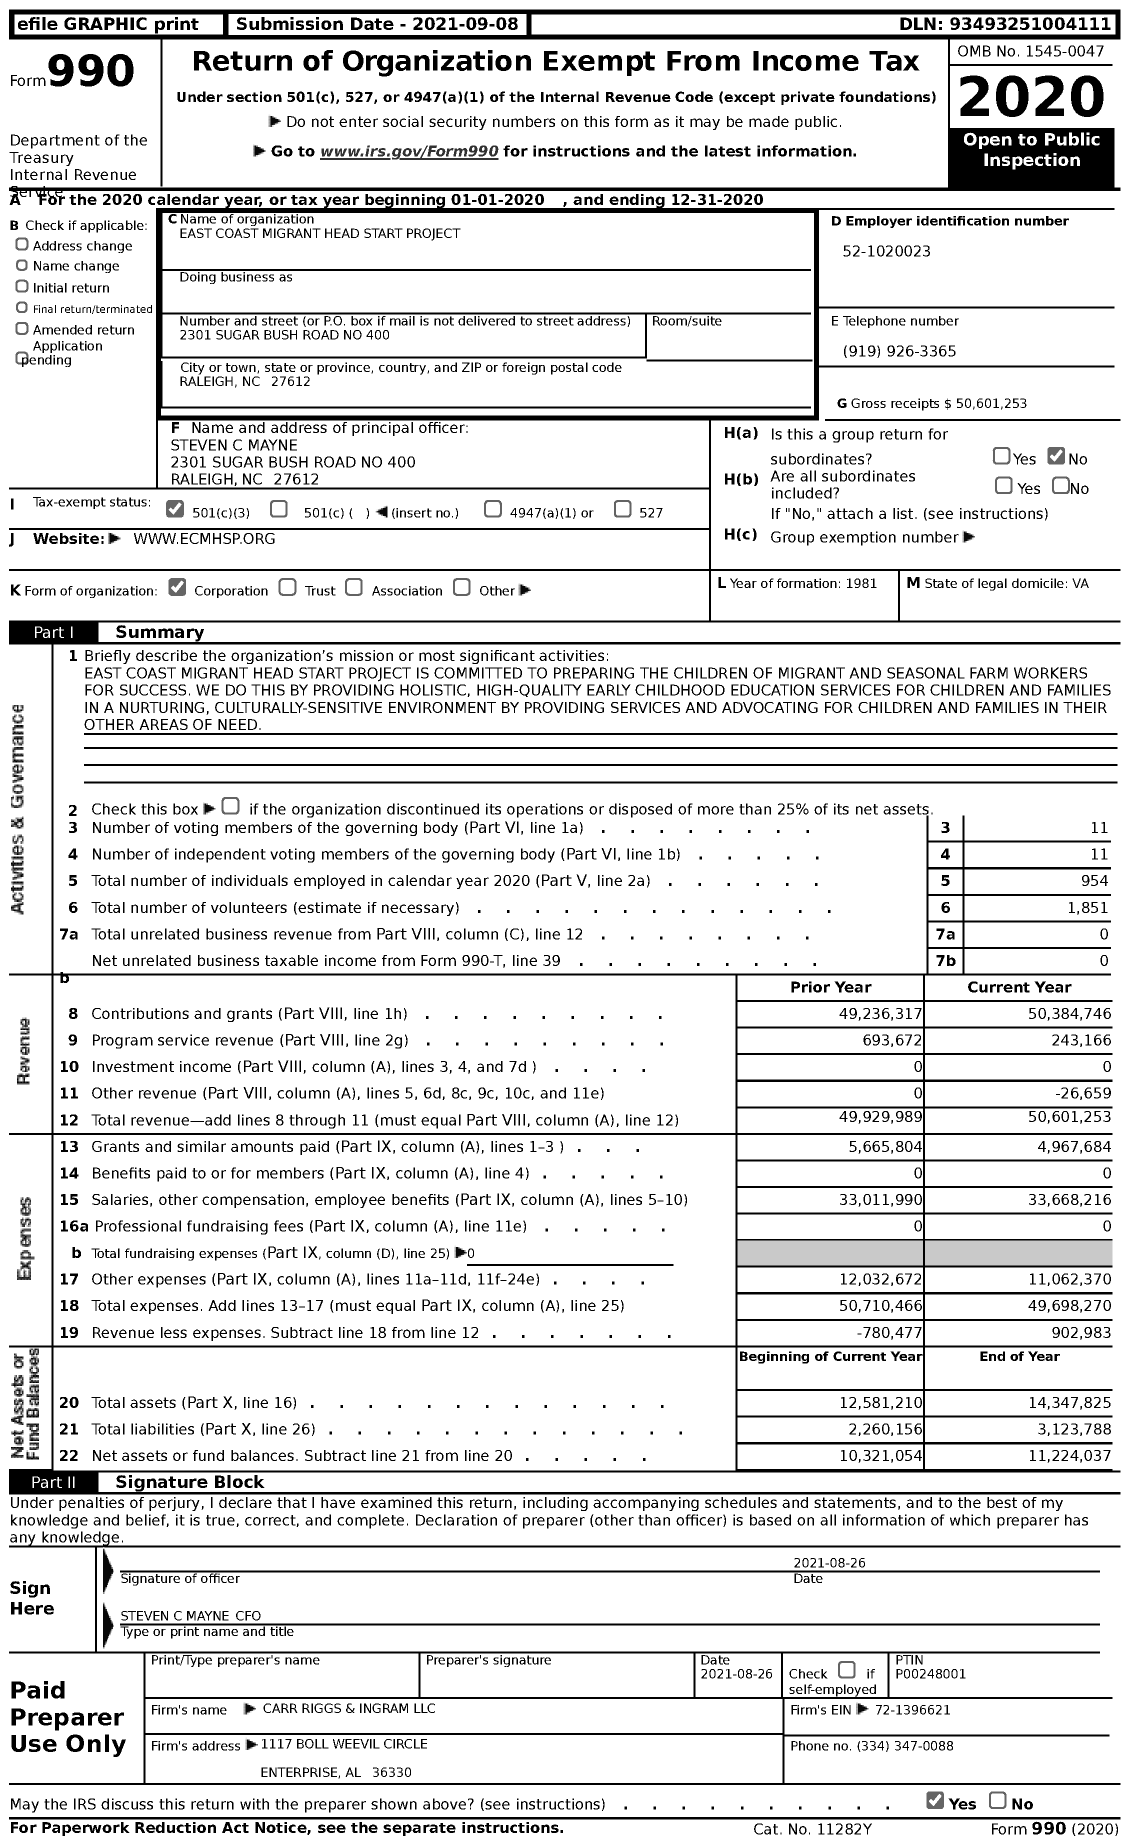 Image of first page of 2020 Form 990 for East Coast Migrant Head Start Project (ECMHSP)